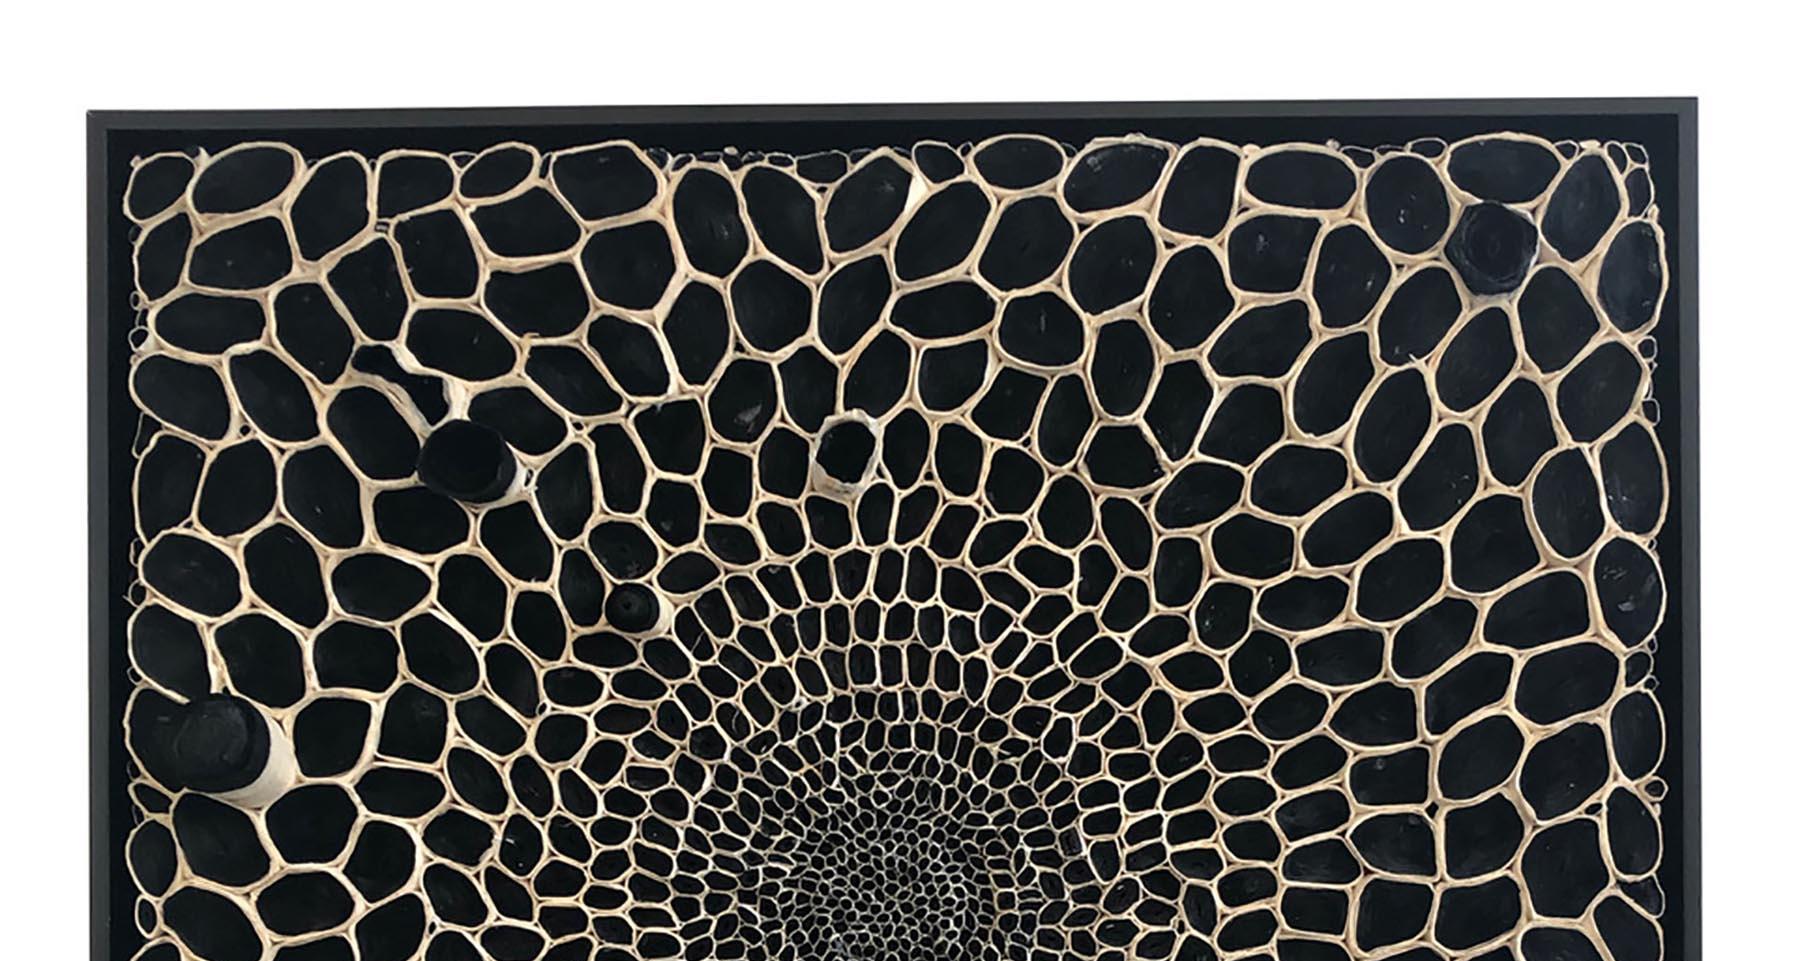 These black & white three dimensional paper pieces are by Amy Genser. These  textural, one-of-a-kind wall pieces embody movement and processes. She masterfully manipulates paper -- each piece being cut, rolled and stacked -- to mimic organic forms